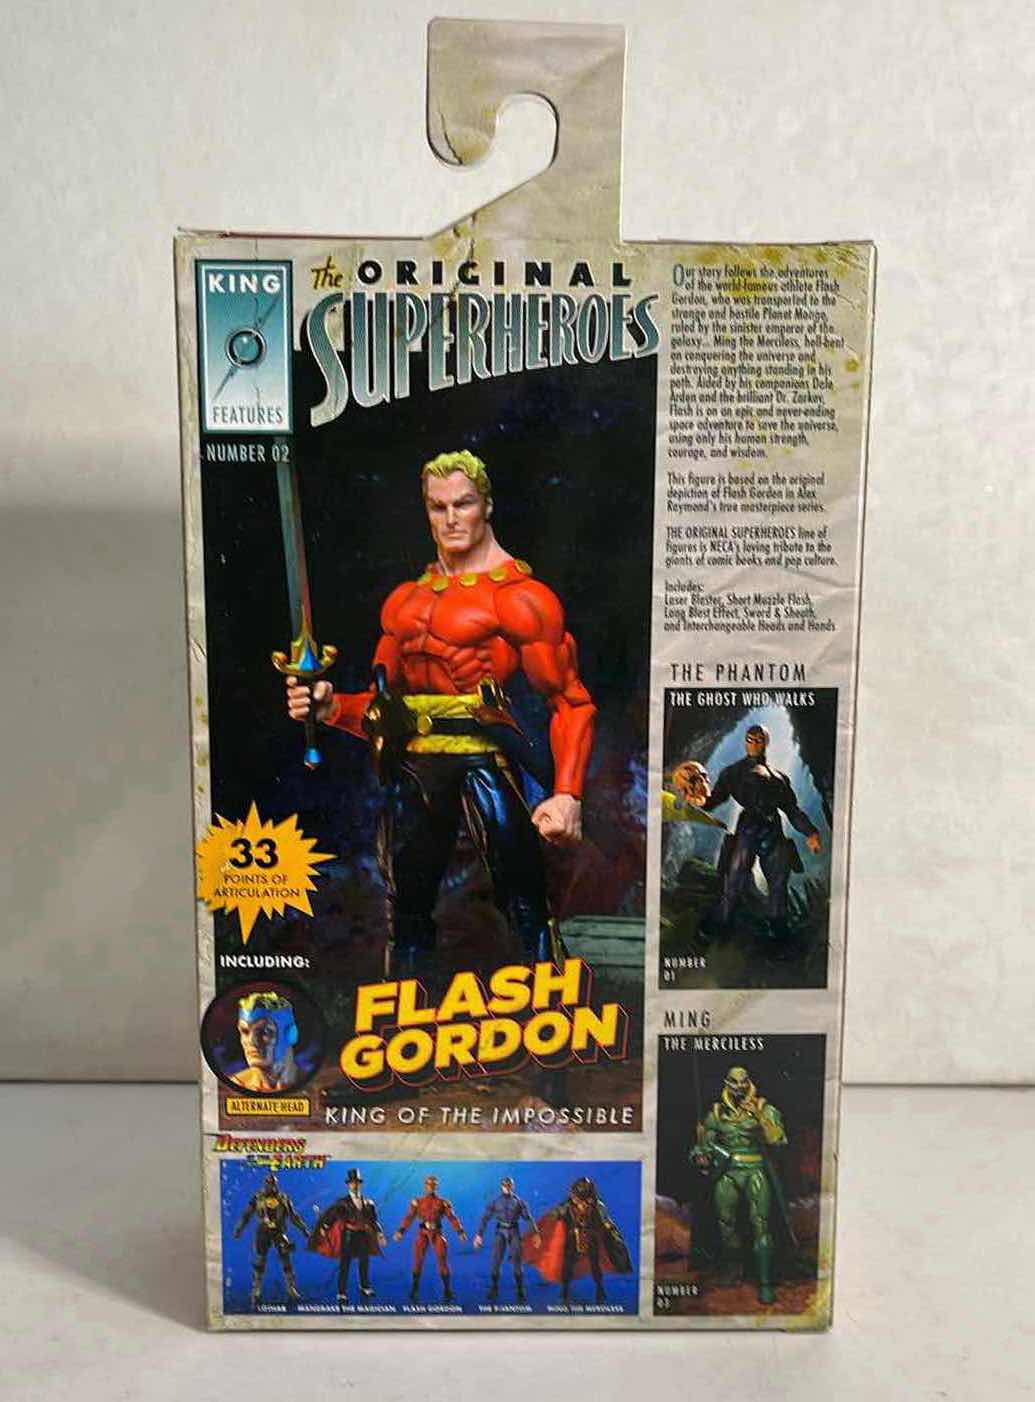 Photo 2 of NIB ORIGINAL SUPERHEROES KING FEATURES “KING OF THE IMPOSSIBLE ” ACTION FIGURE - RETAIL PRICE $34.99